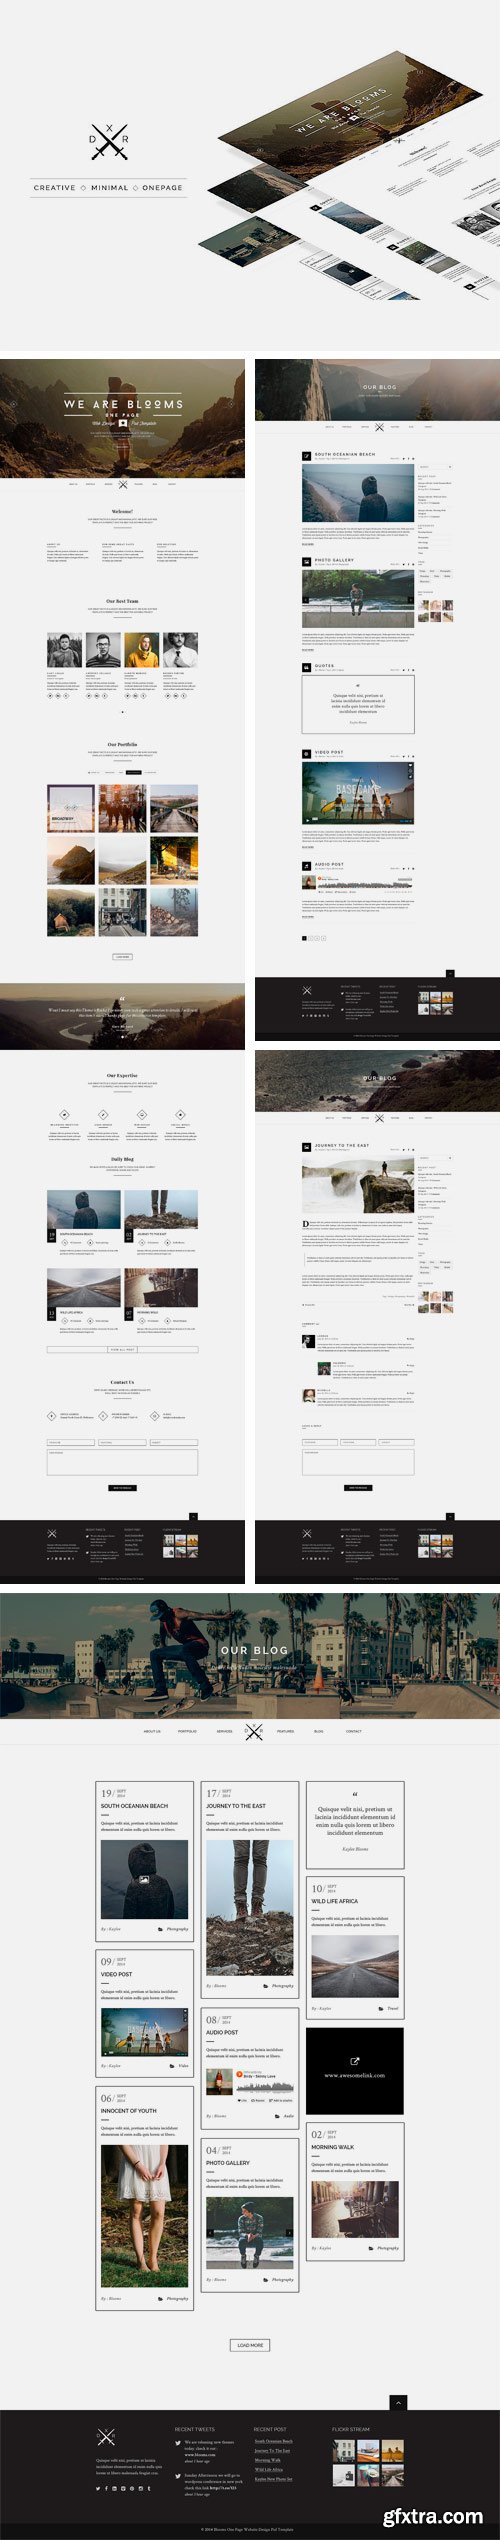 CM - Blooms One Page Psd Web Template 2180729